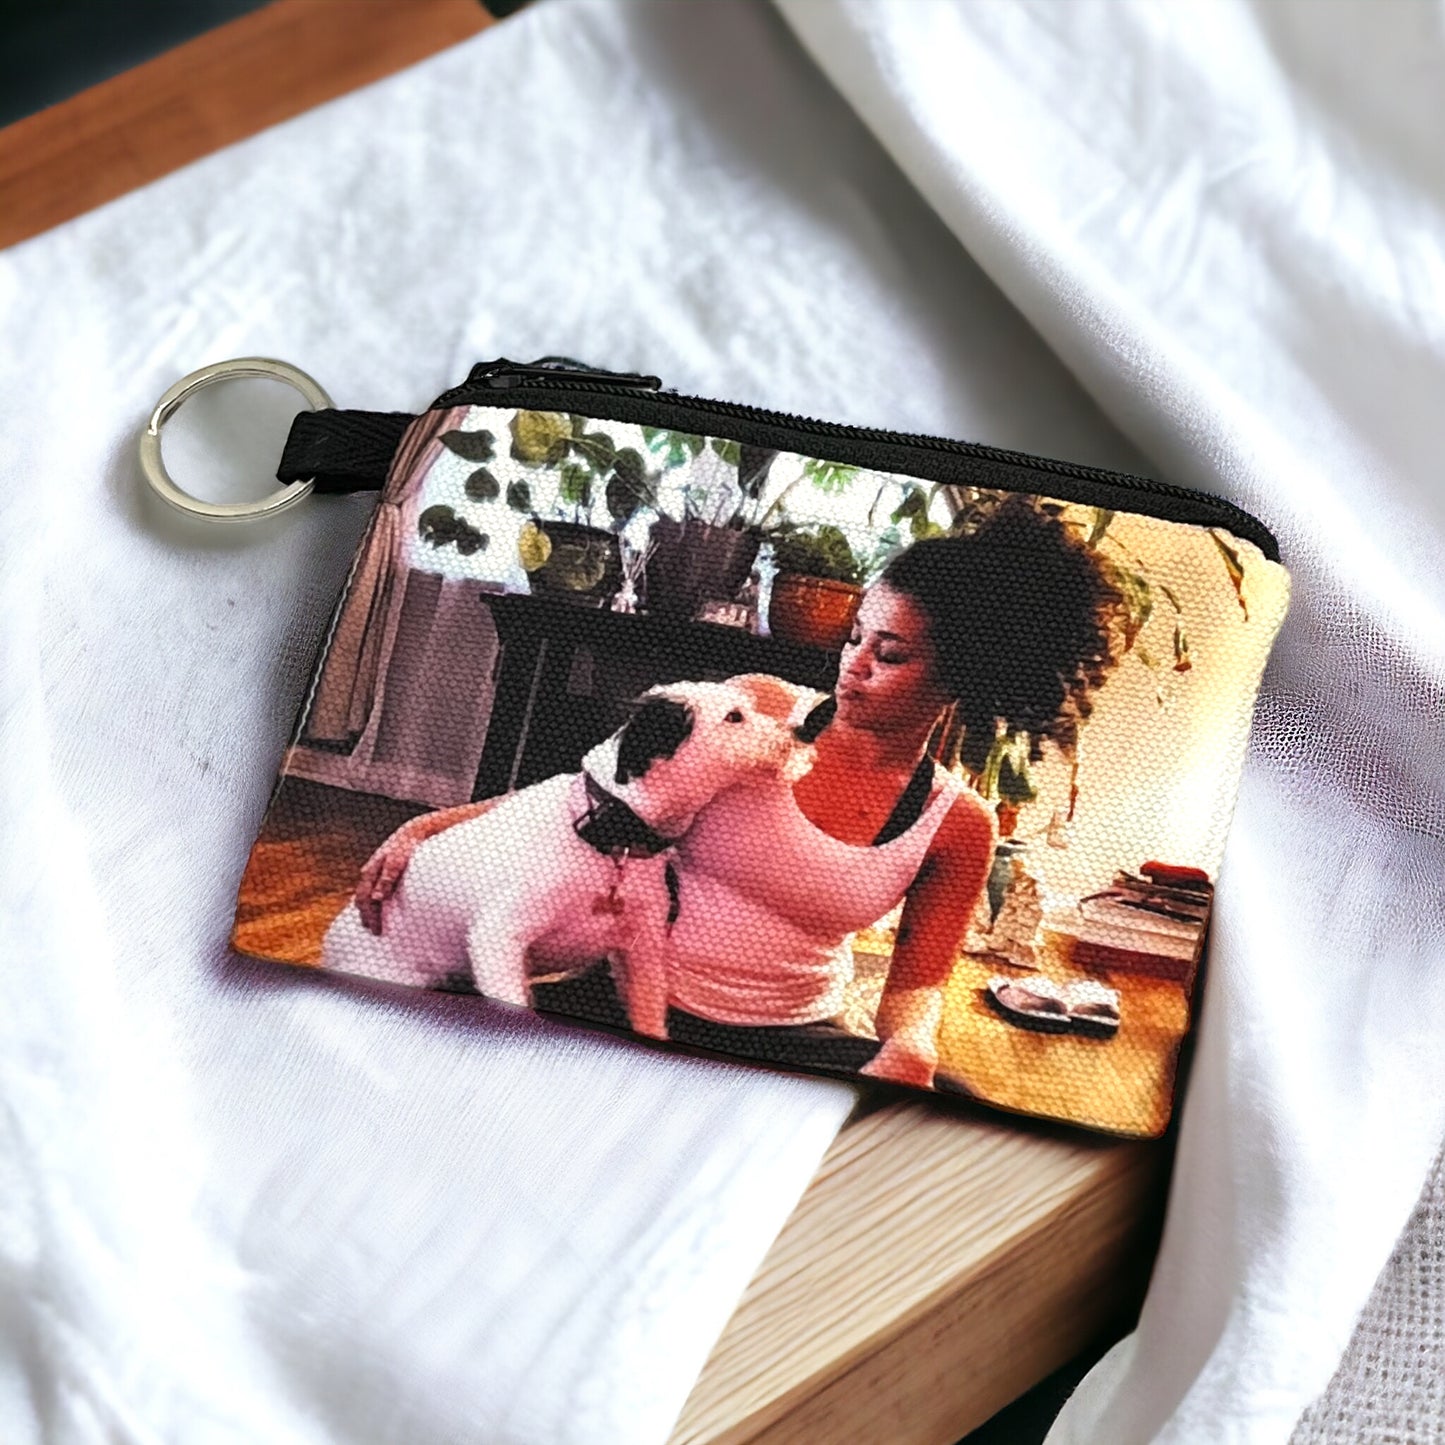 Personalized Dog Photo Coin Purse - Custom Pet Picture Zipper Pouch